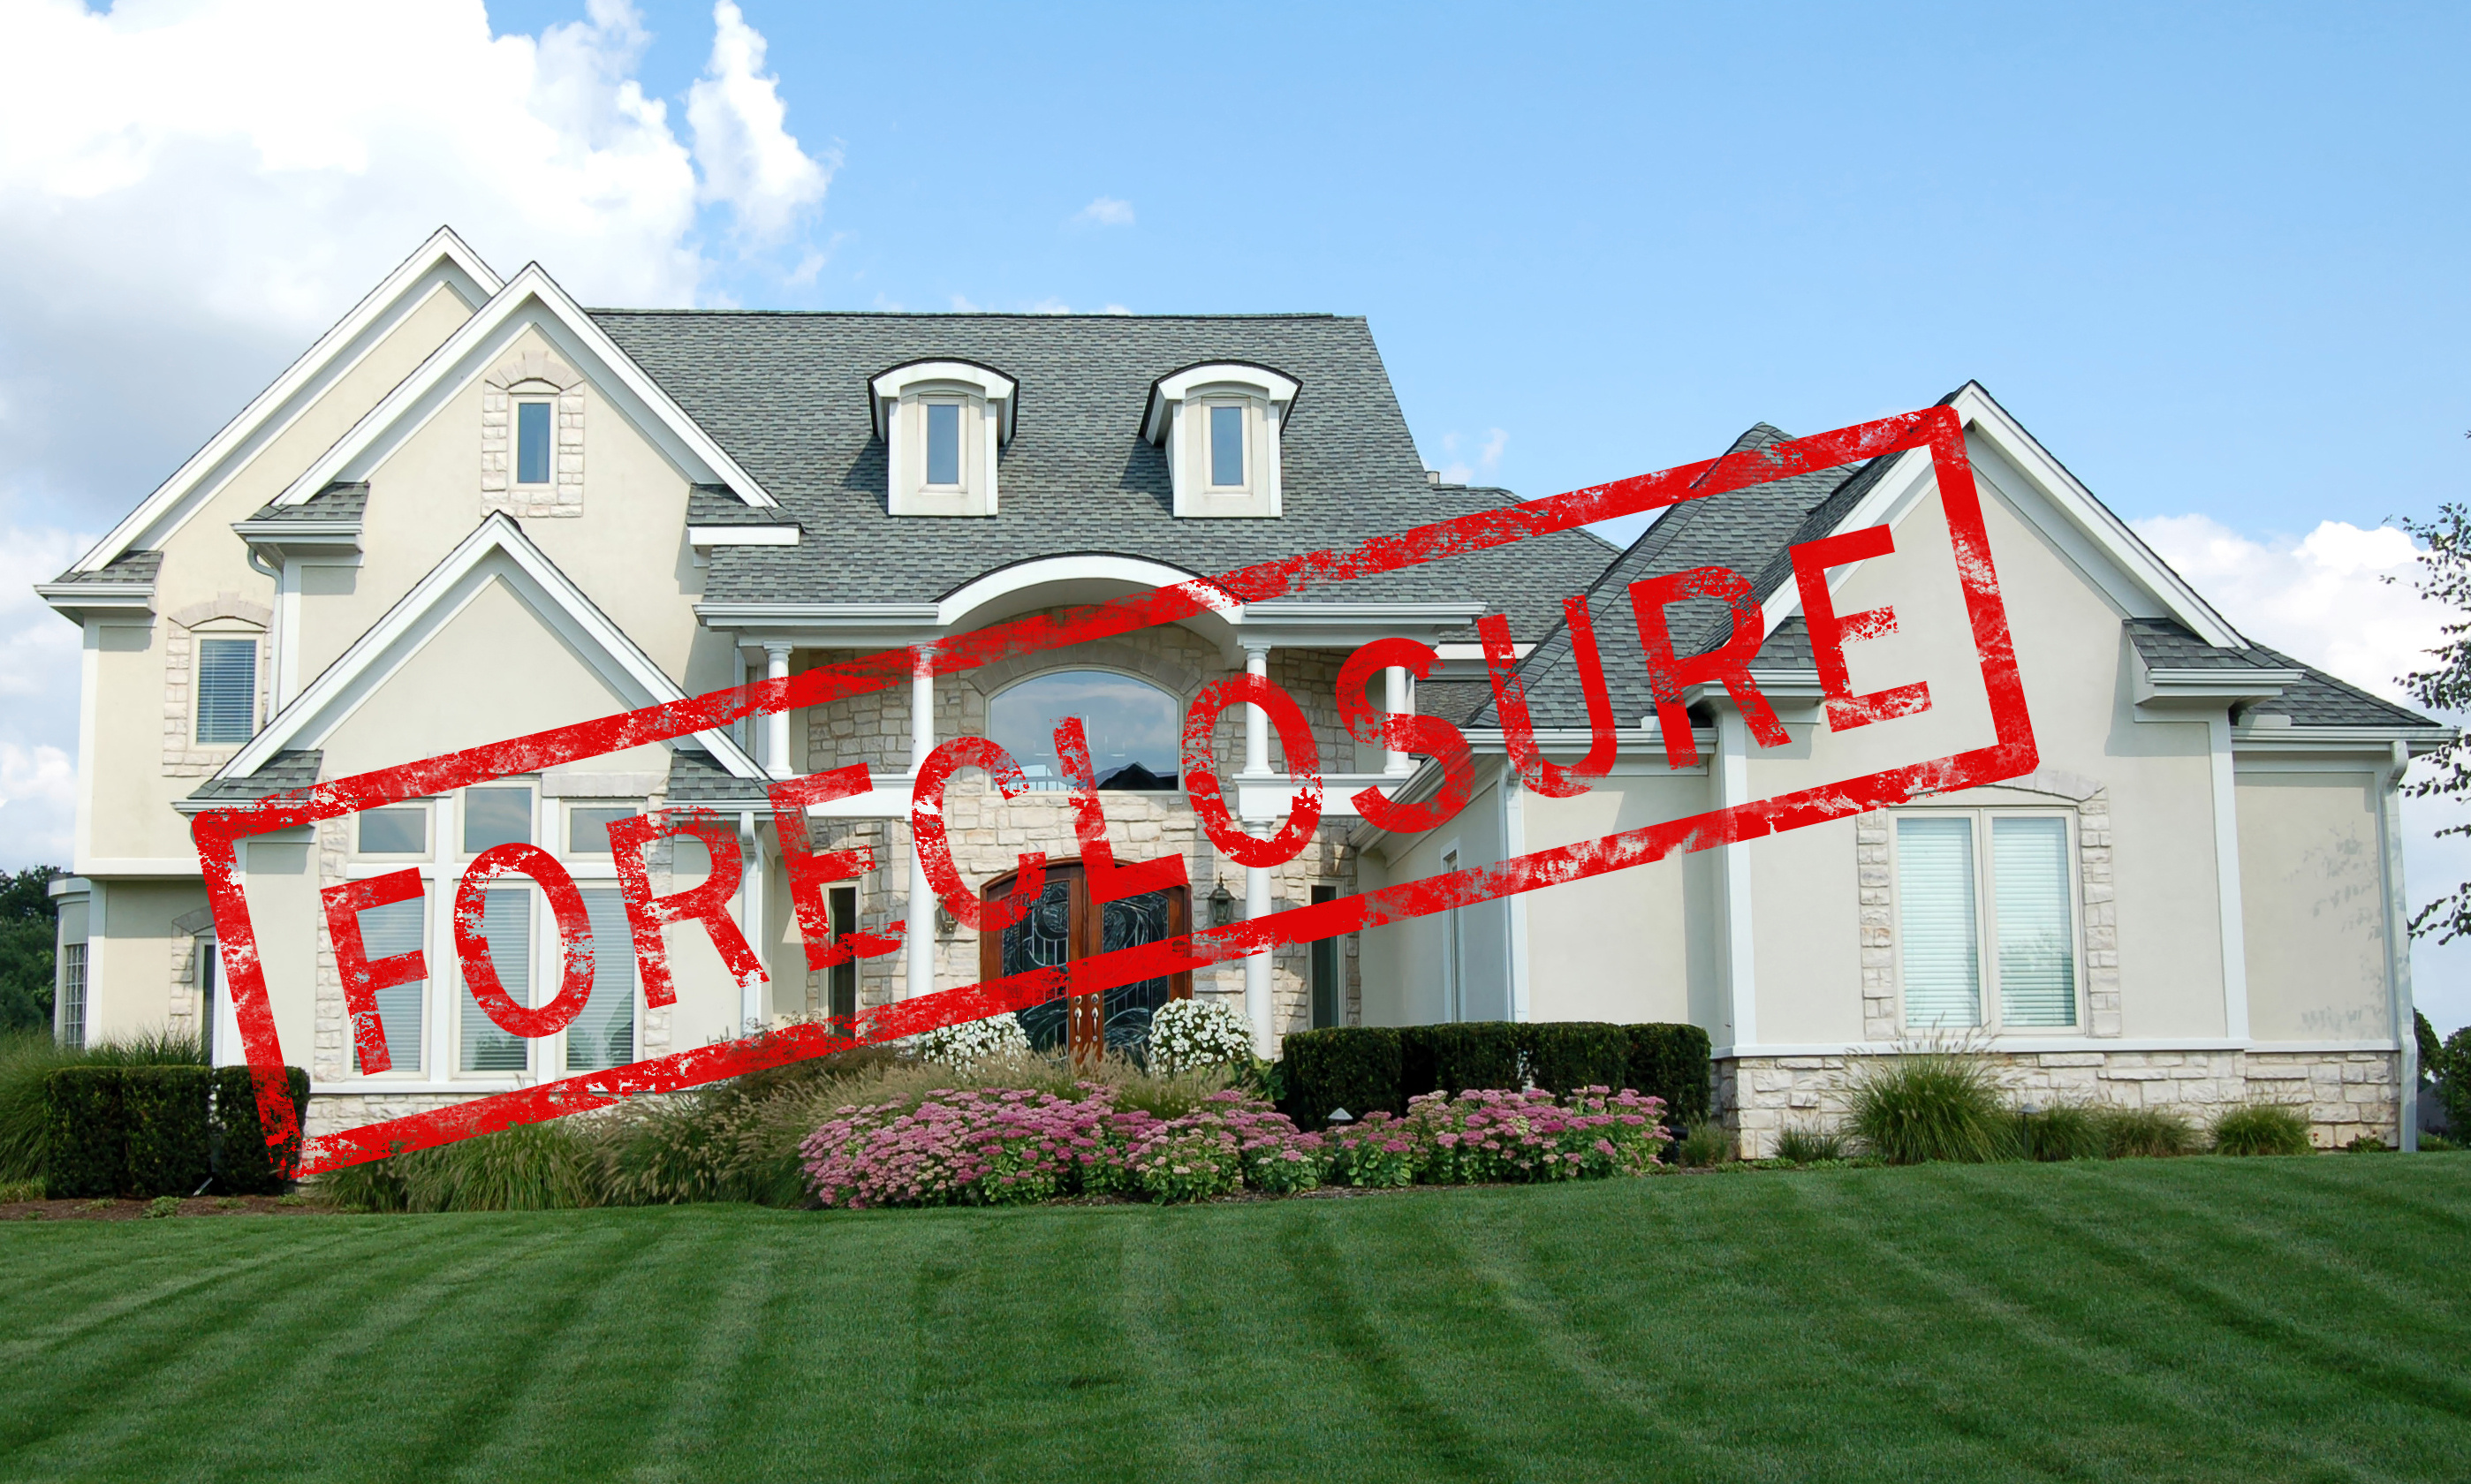 Call JWD Appraisal service LLC. to discuss appraisals of Monmouth foreclosures